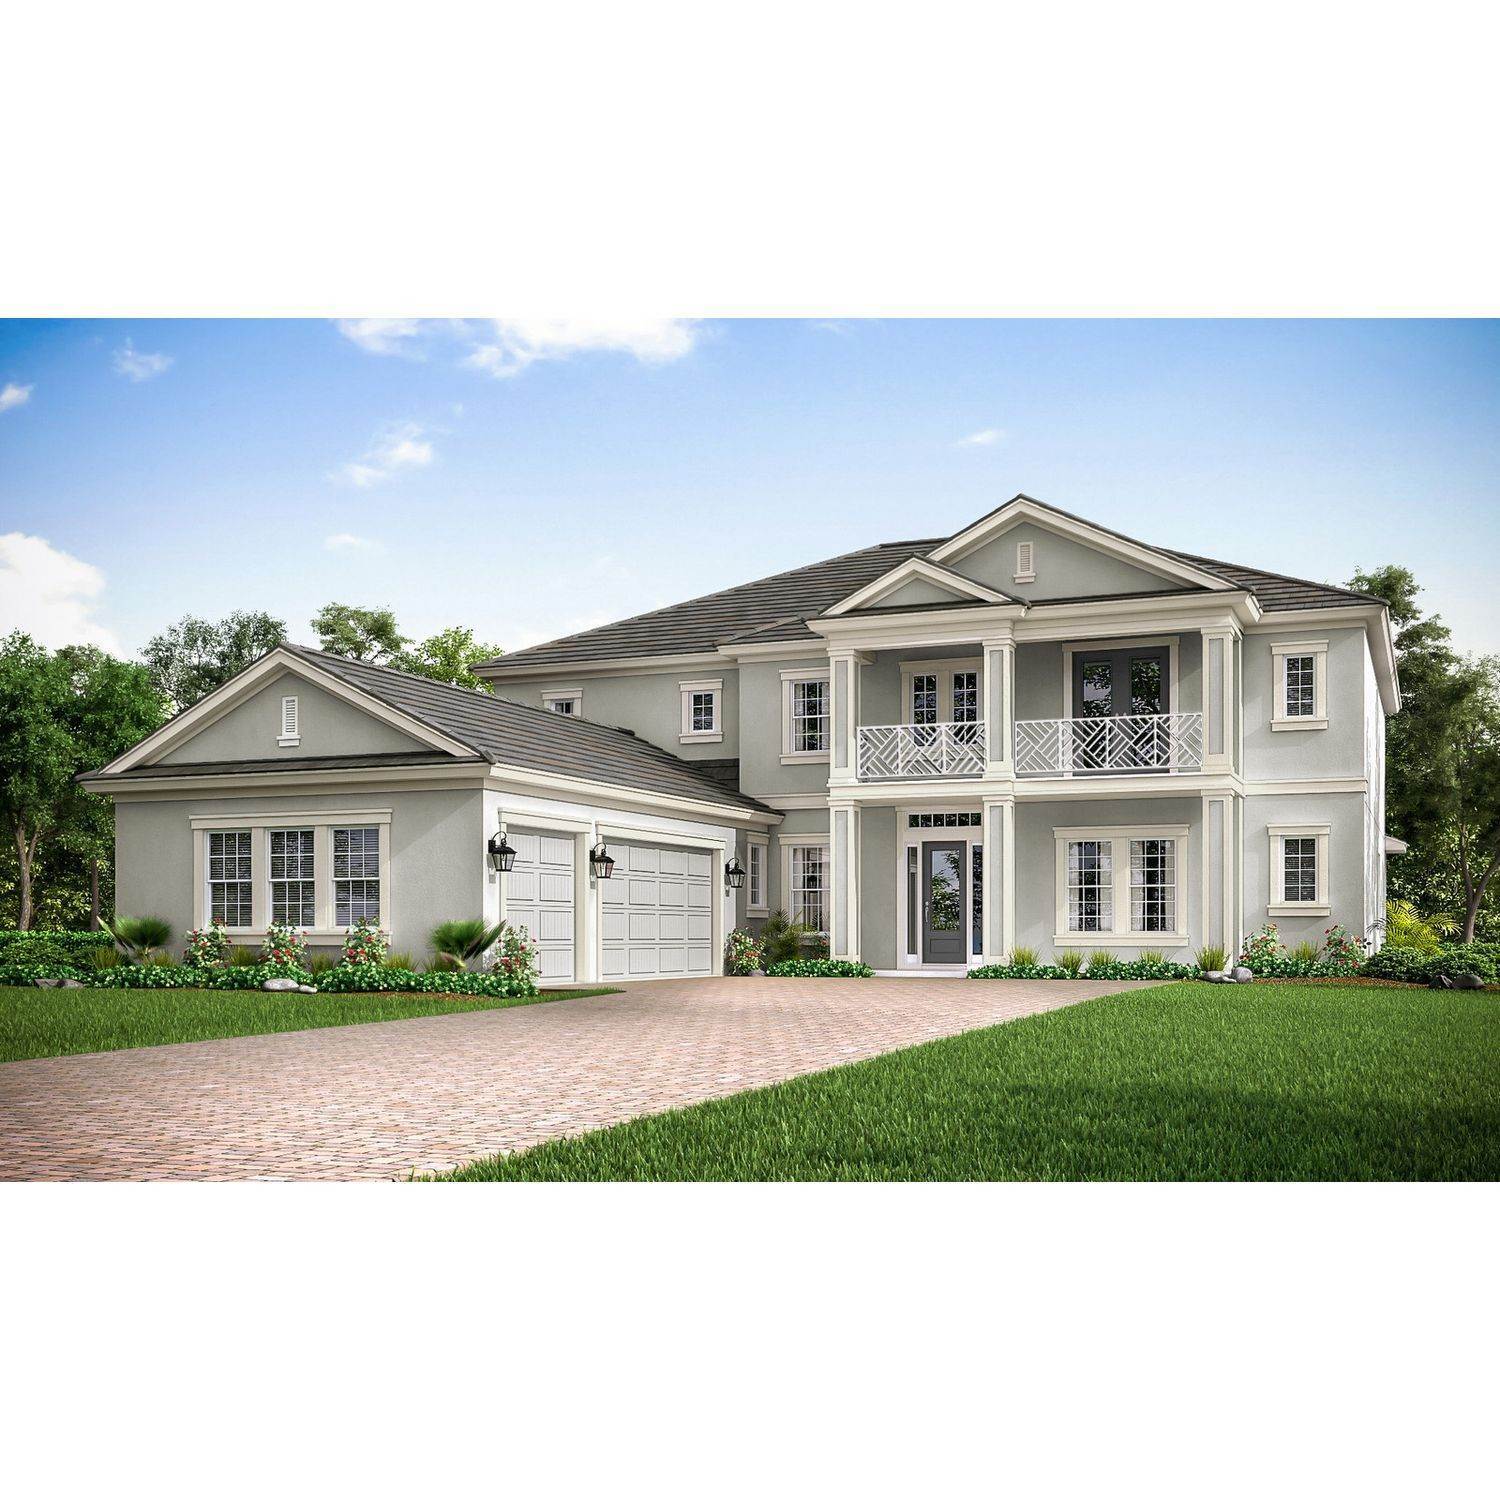 Single Family for Sale at River's Edge - Patterson 2526 Meander Cove WESLEY CHAPEL, FLORIDA 33543 UNITED STATES